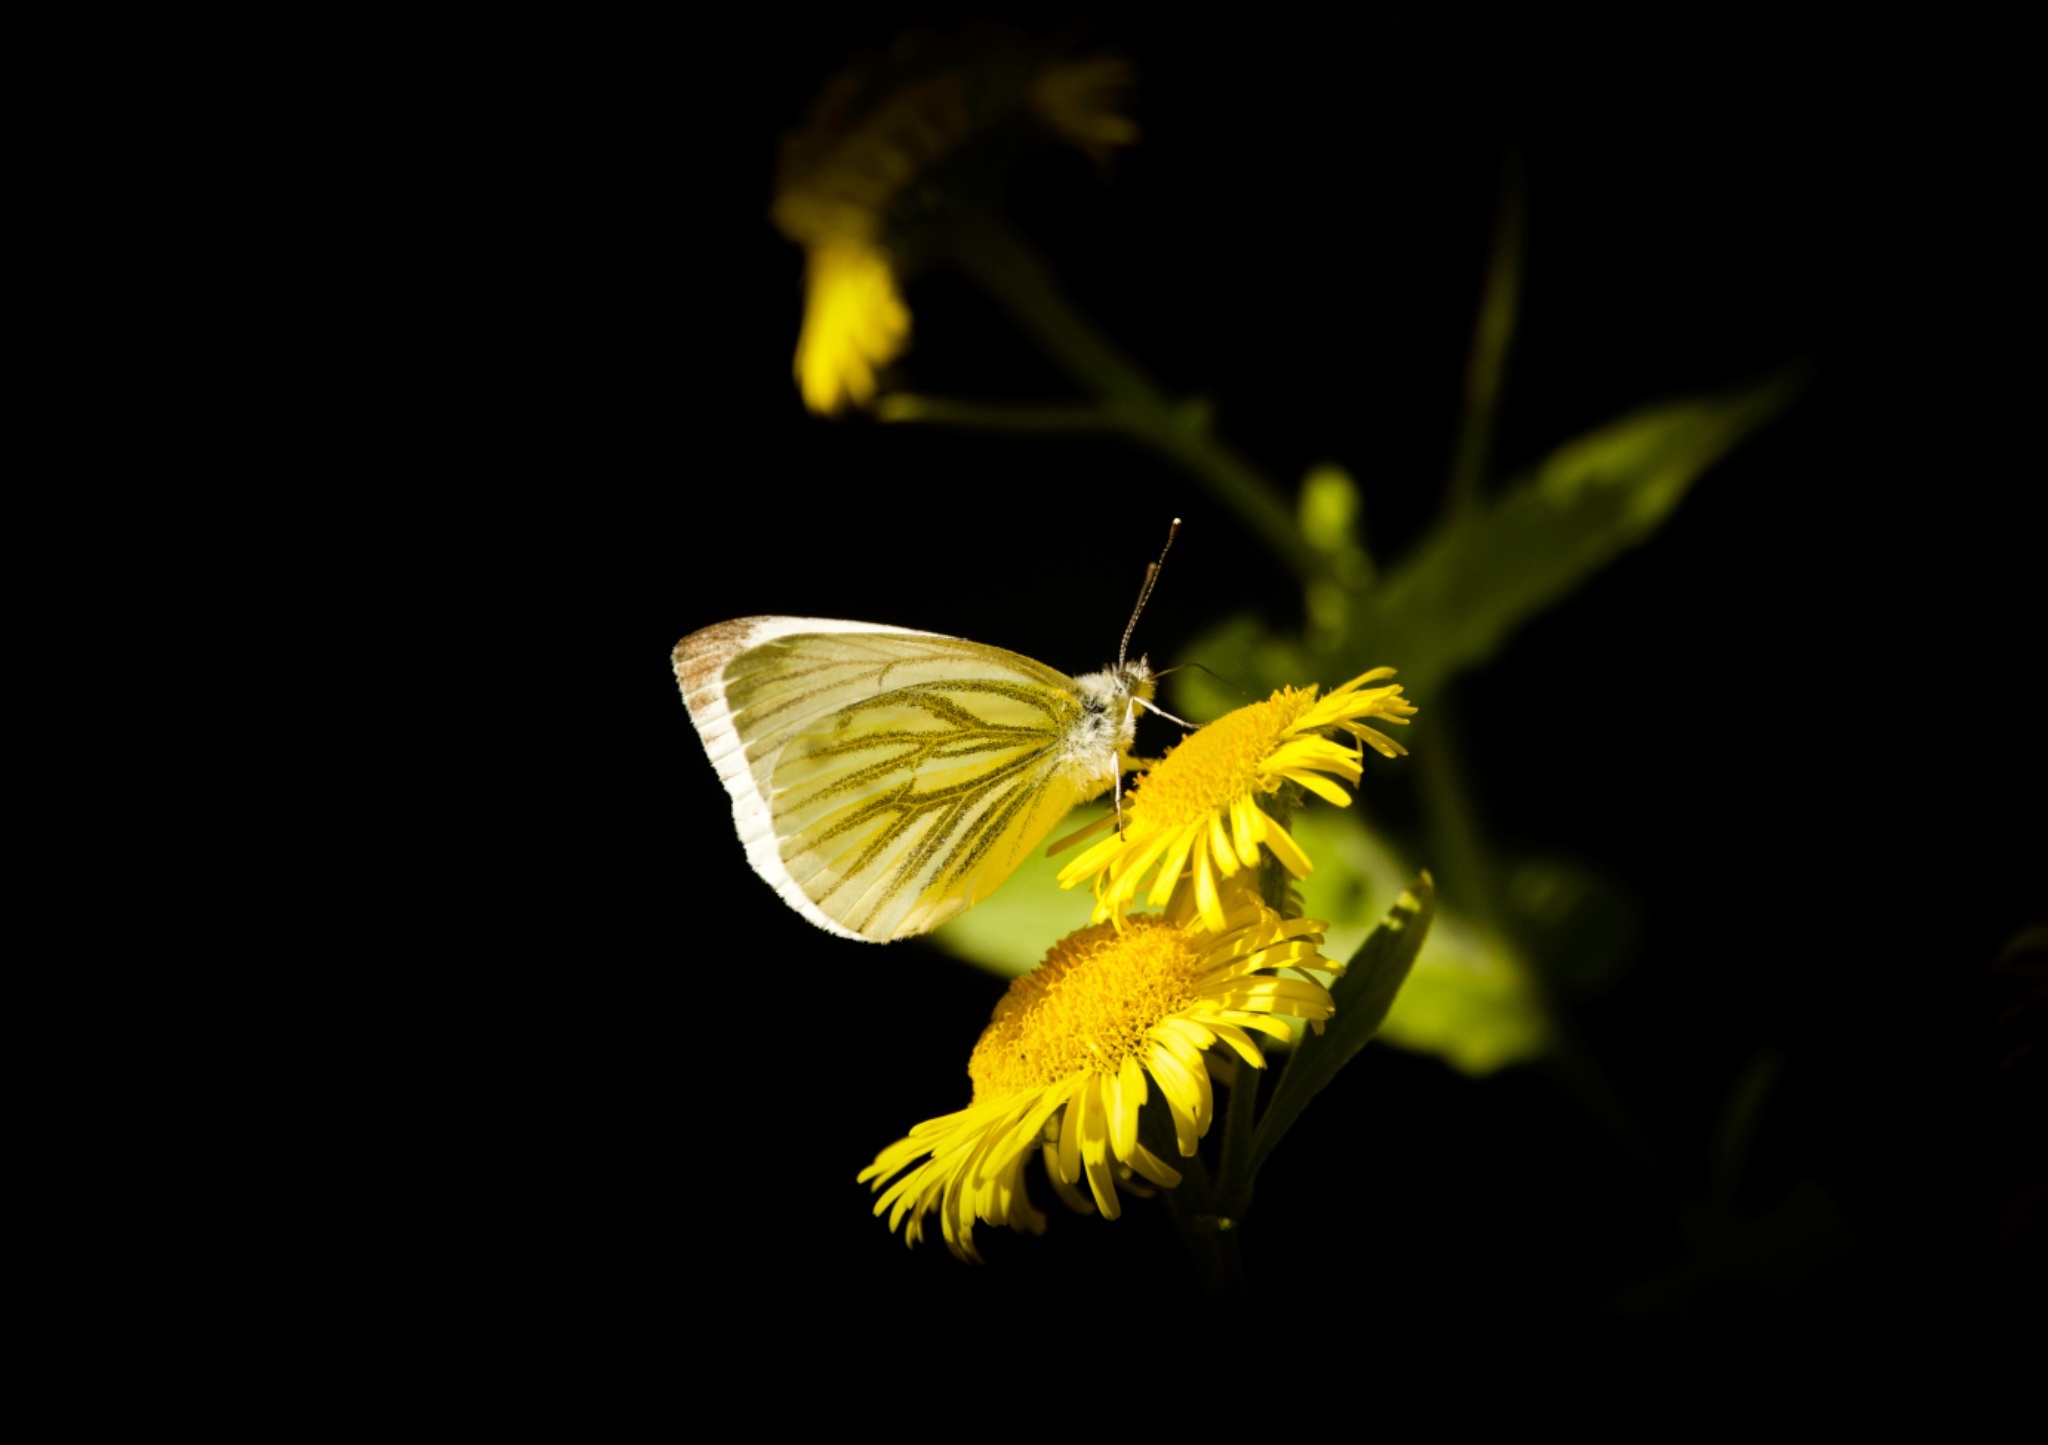 A great-veined white butterfly by Heather Wilde